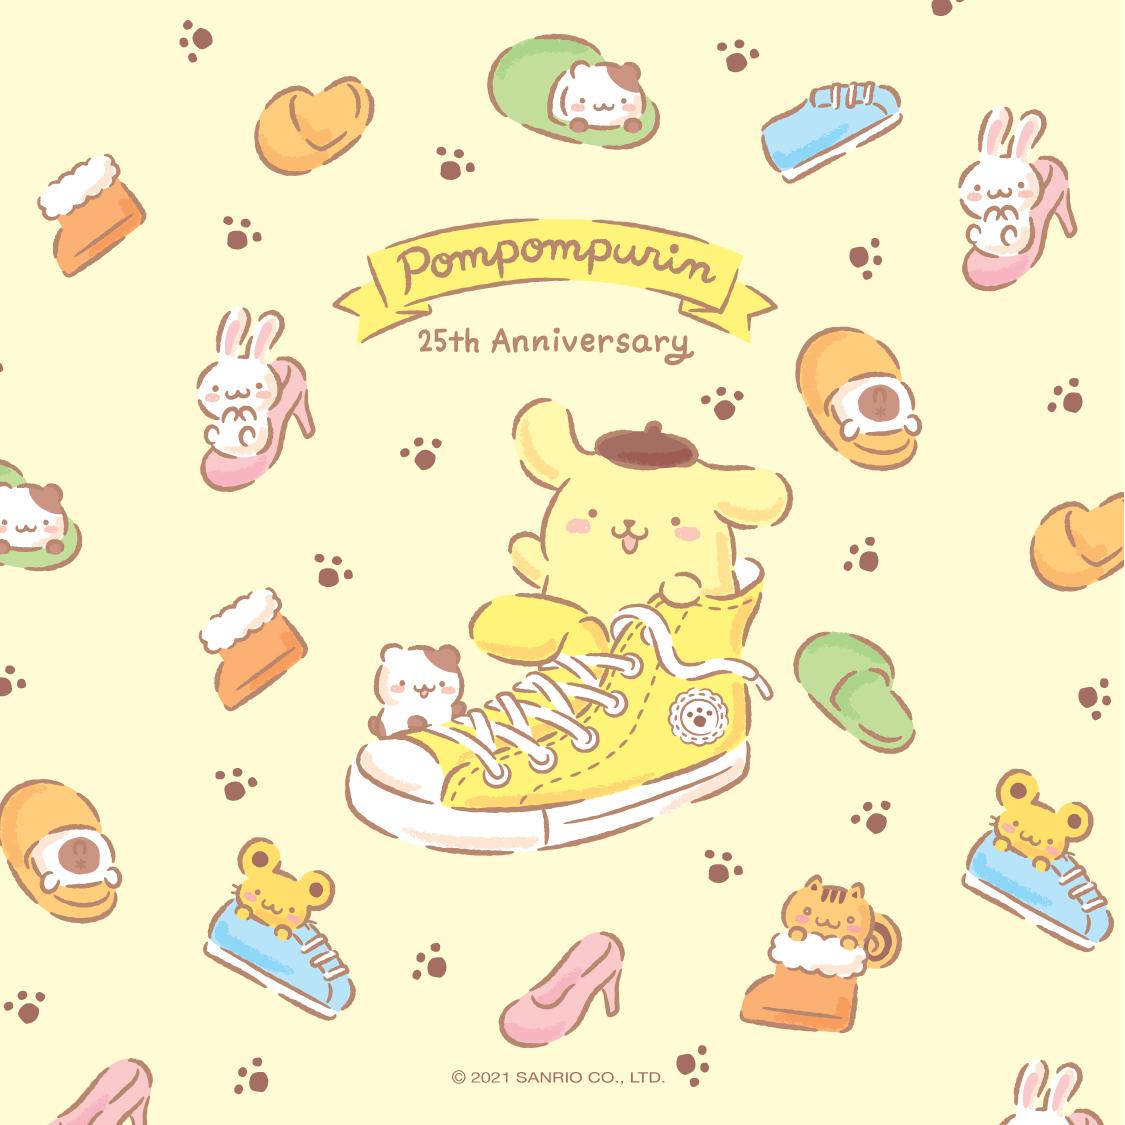 Sanrio on X: Take #Pompompurin on the go with new backgrounds for